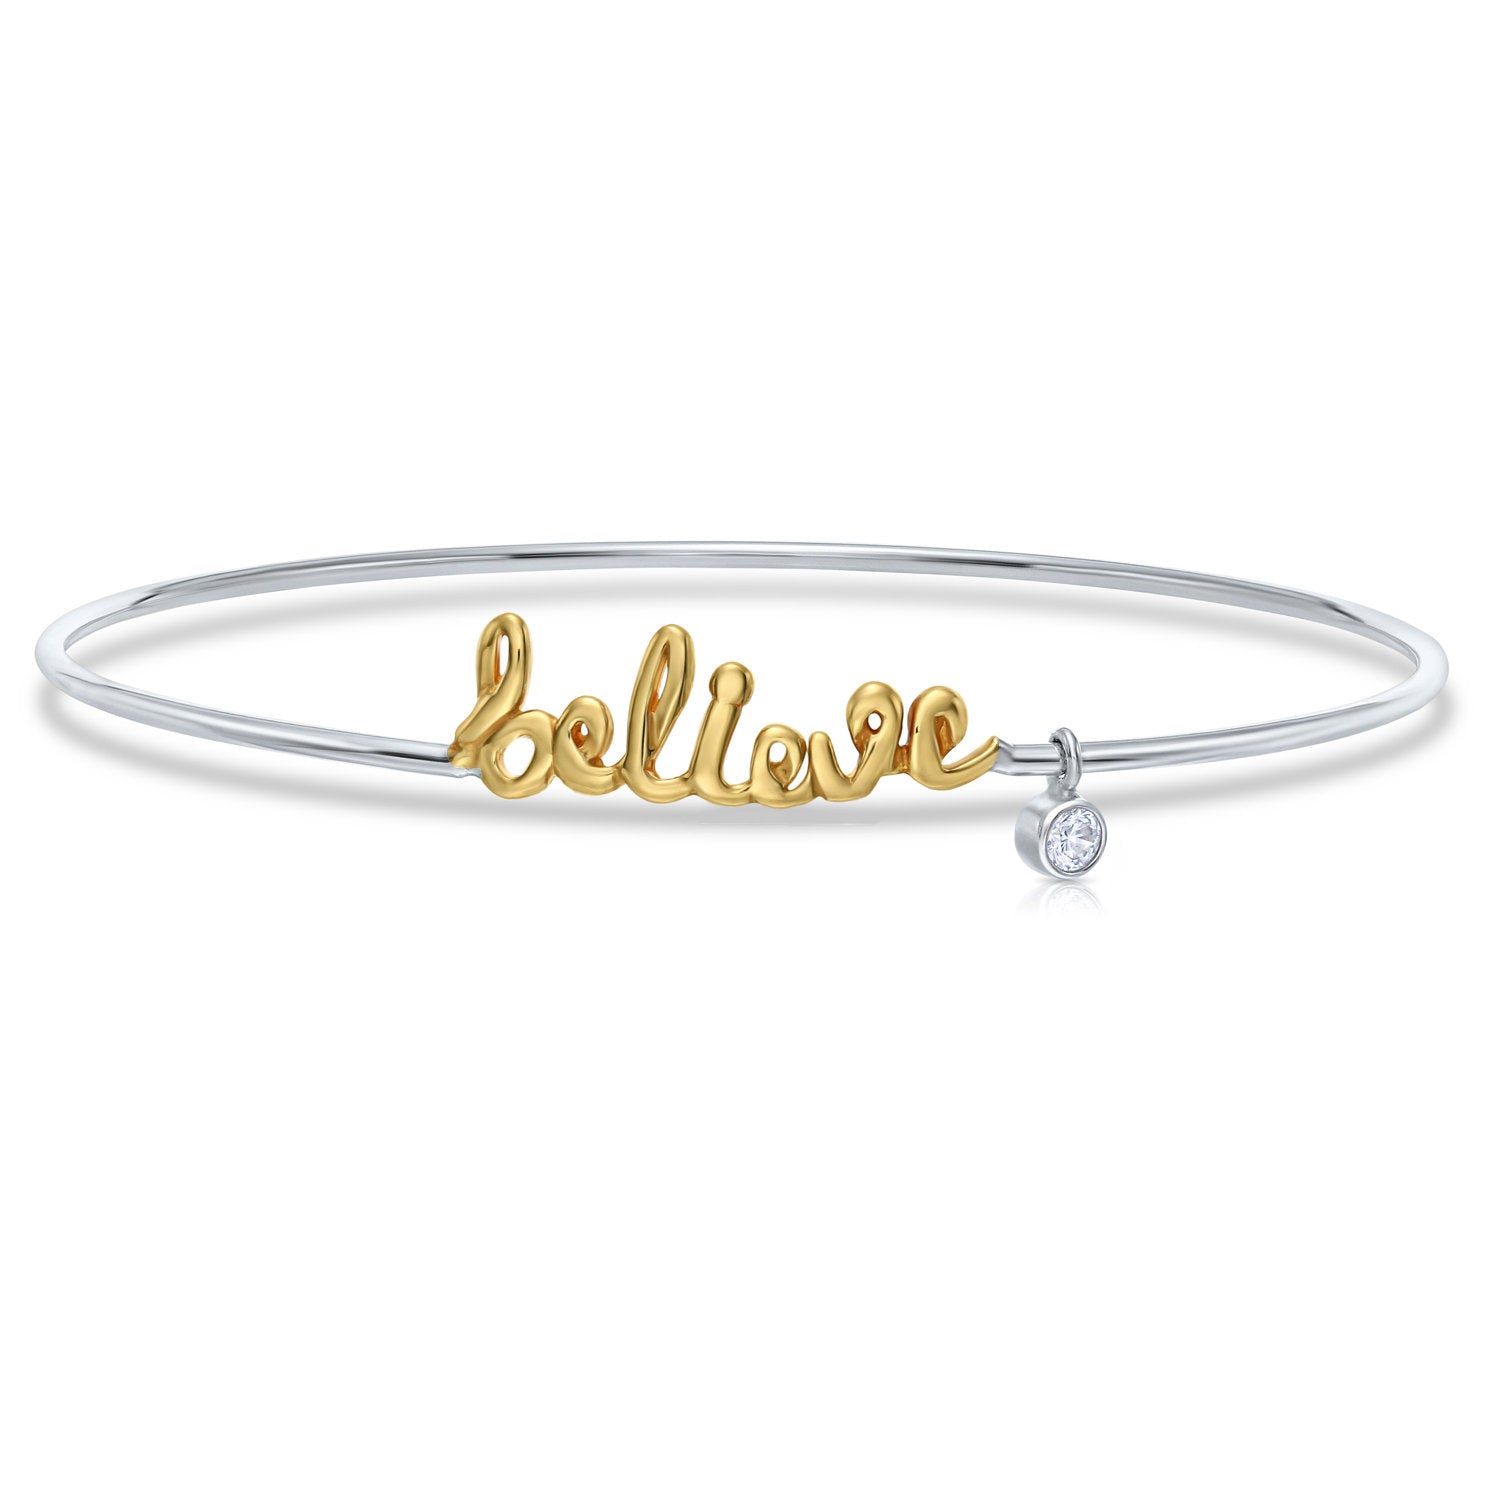 BELIEVE Bangle Bracelet, Gold Plated in Sterling Silver